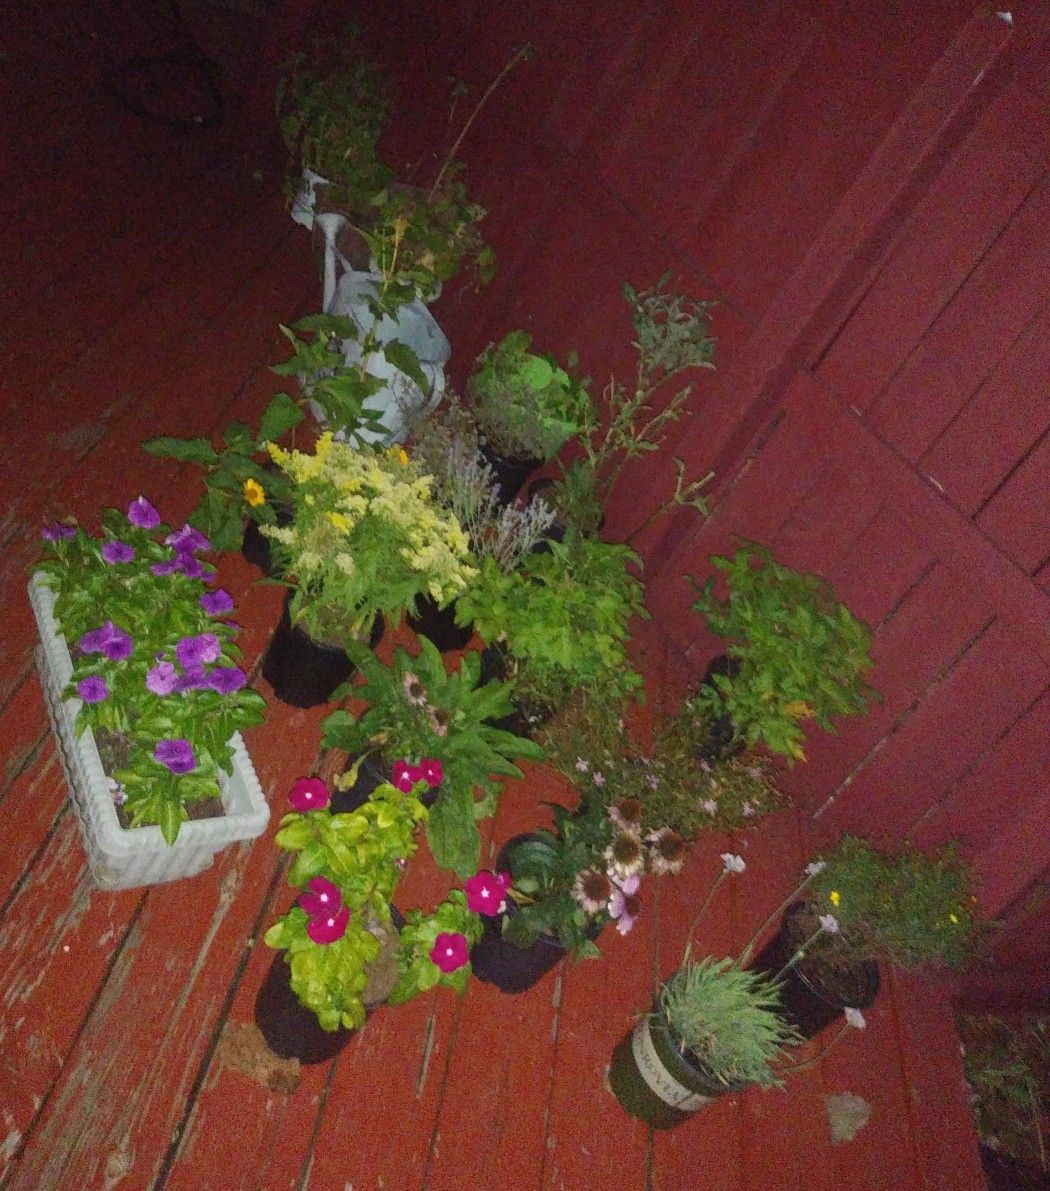 Plants for sale tomorrow Sep 28th Saturday from 9-4 at 163 River City Blvd 63125. Garden and house p